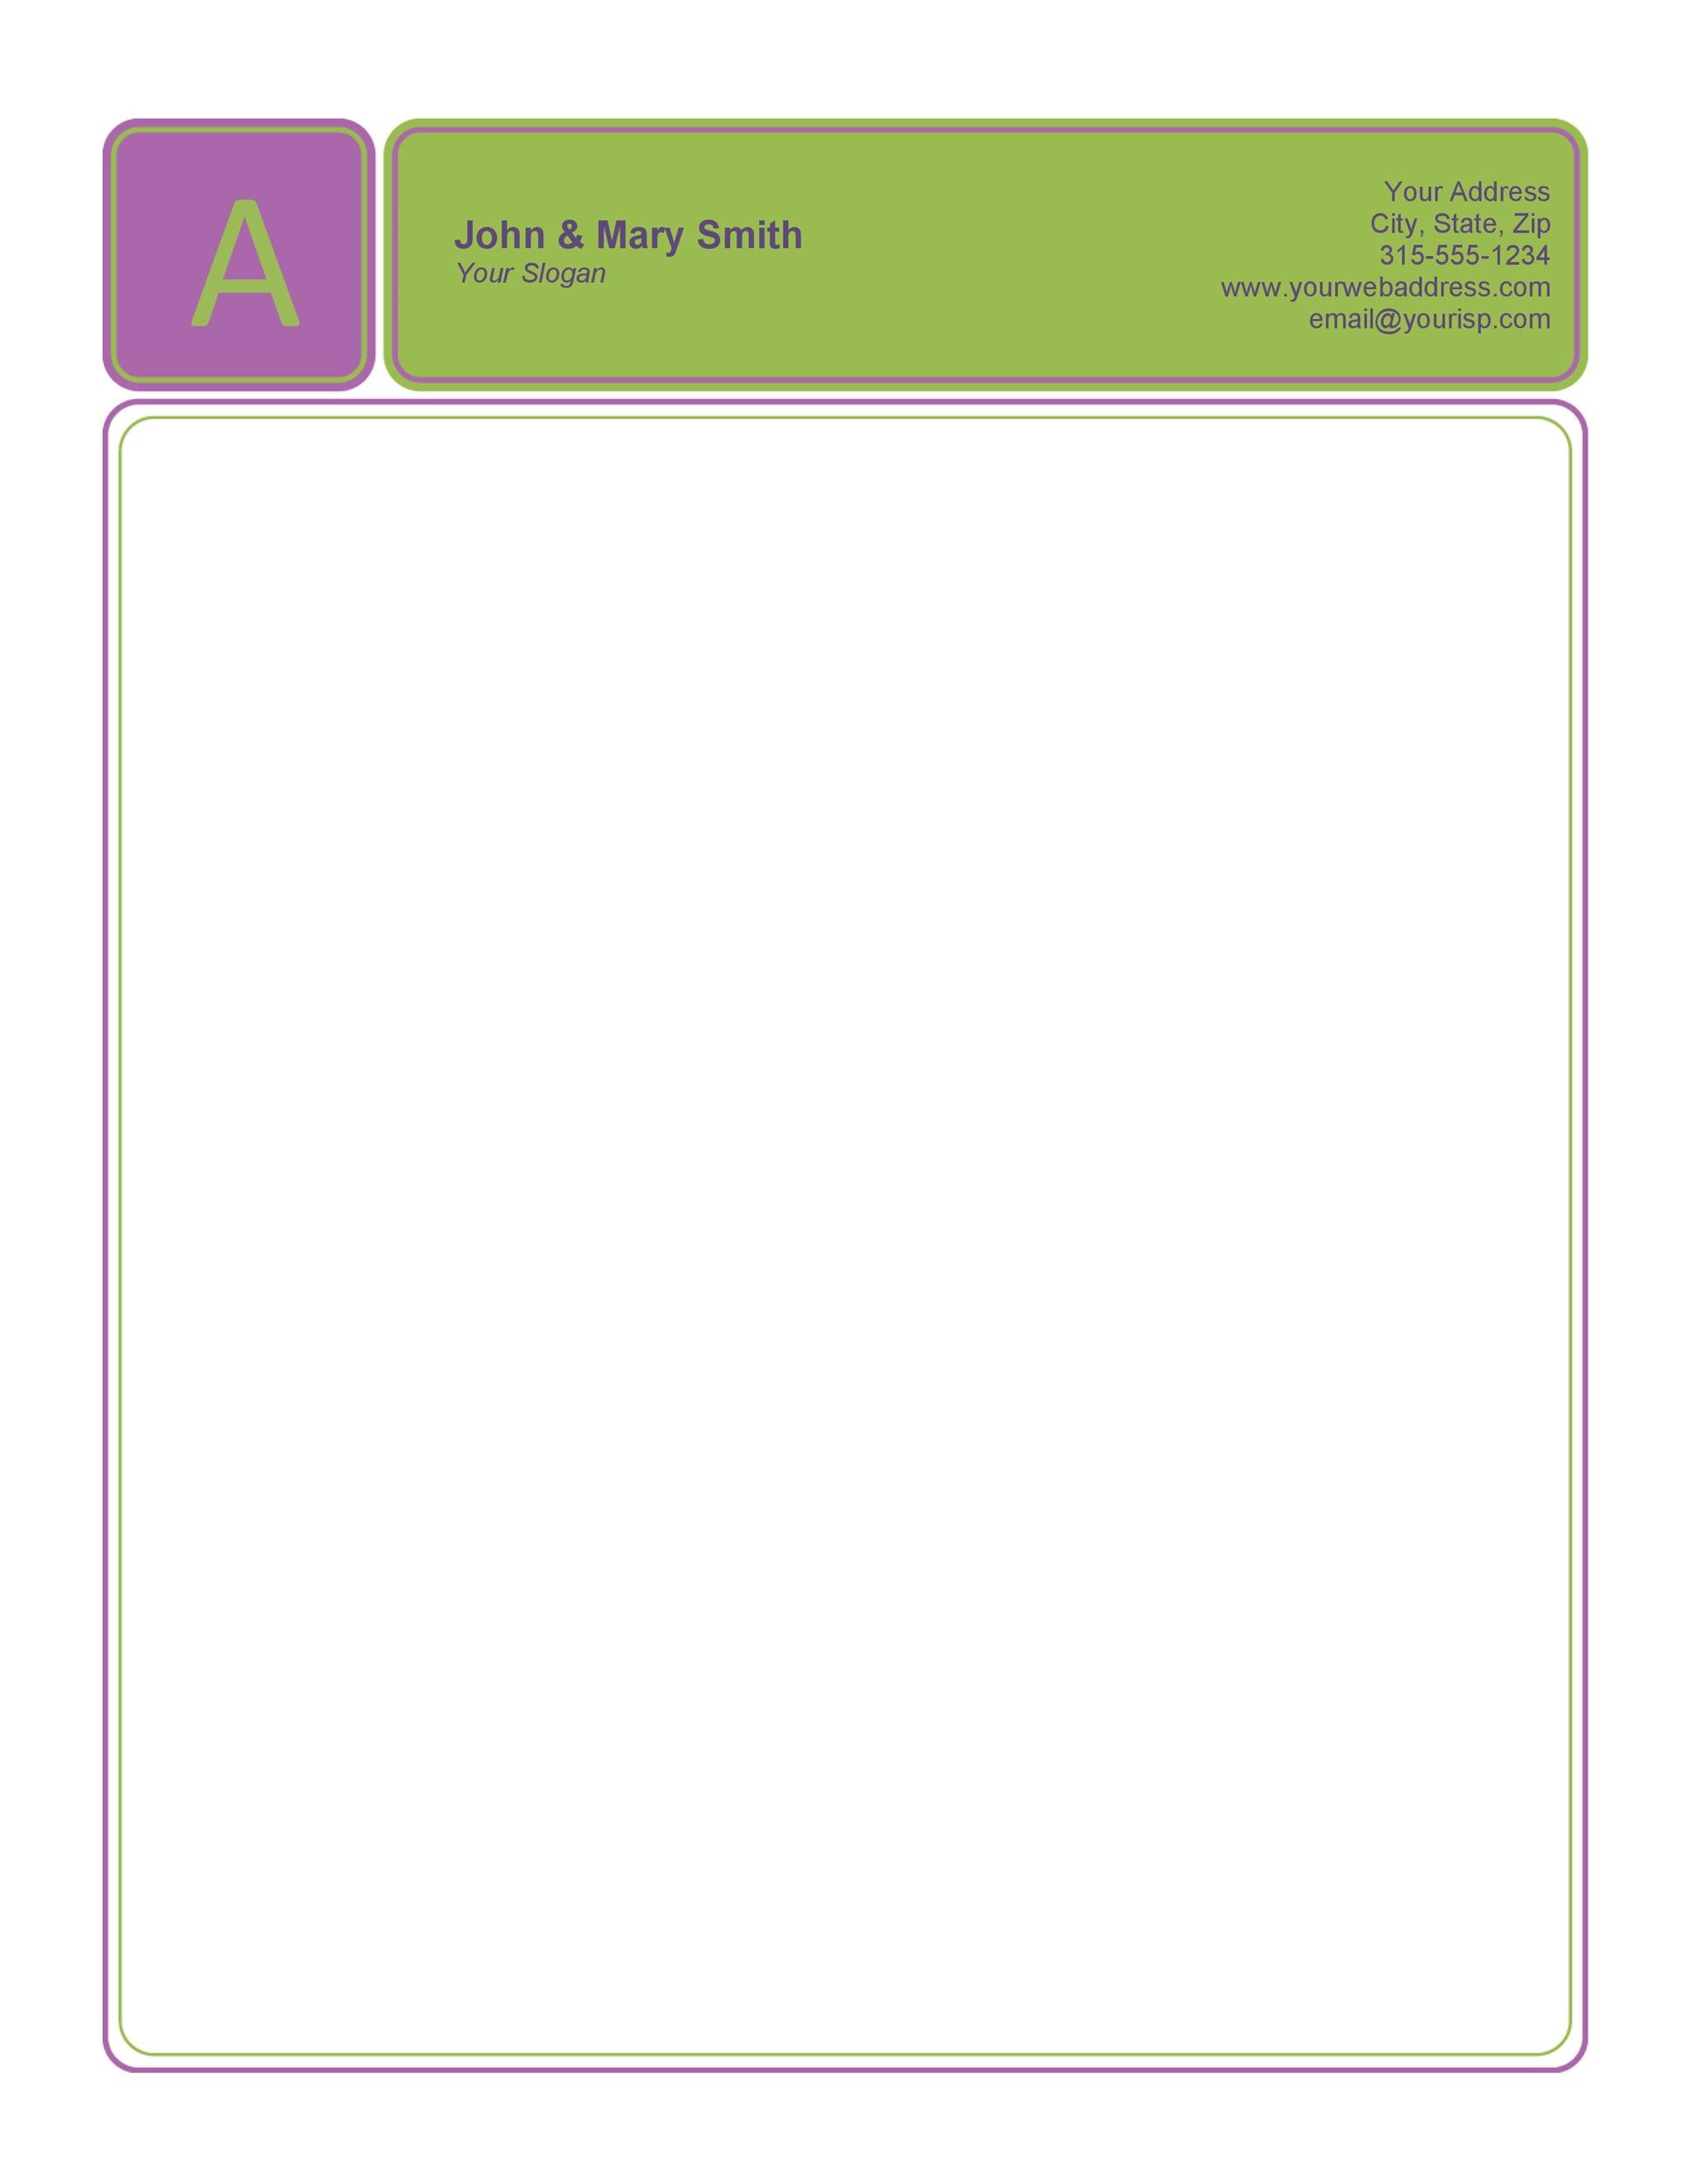 45-free-letterhead-templates-examples-company-business-personal